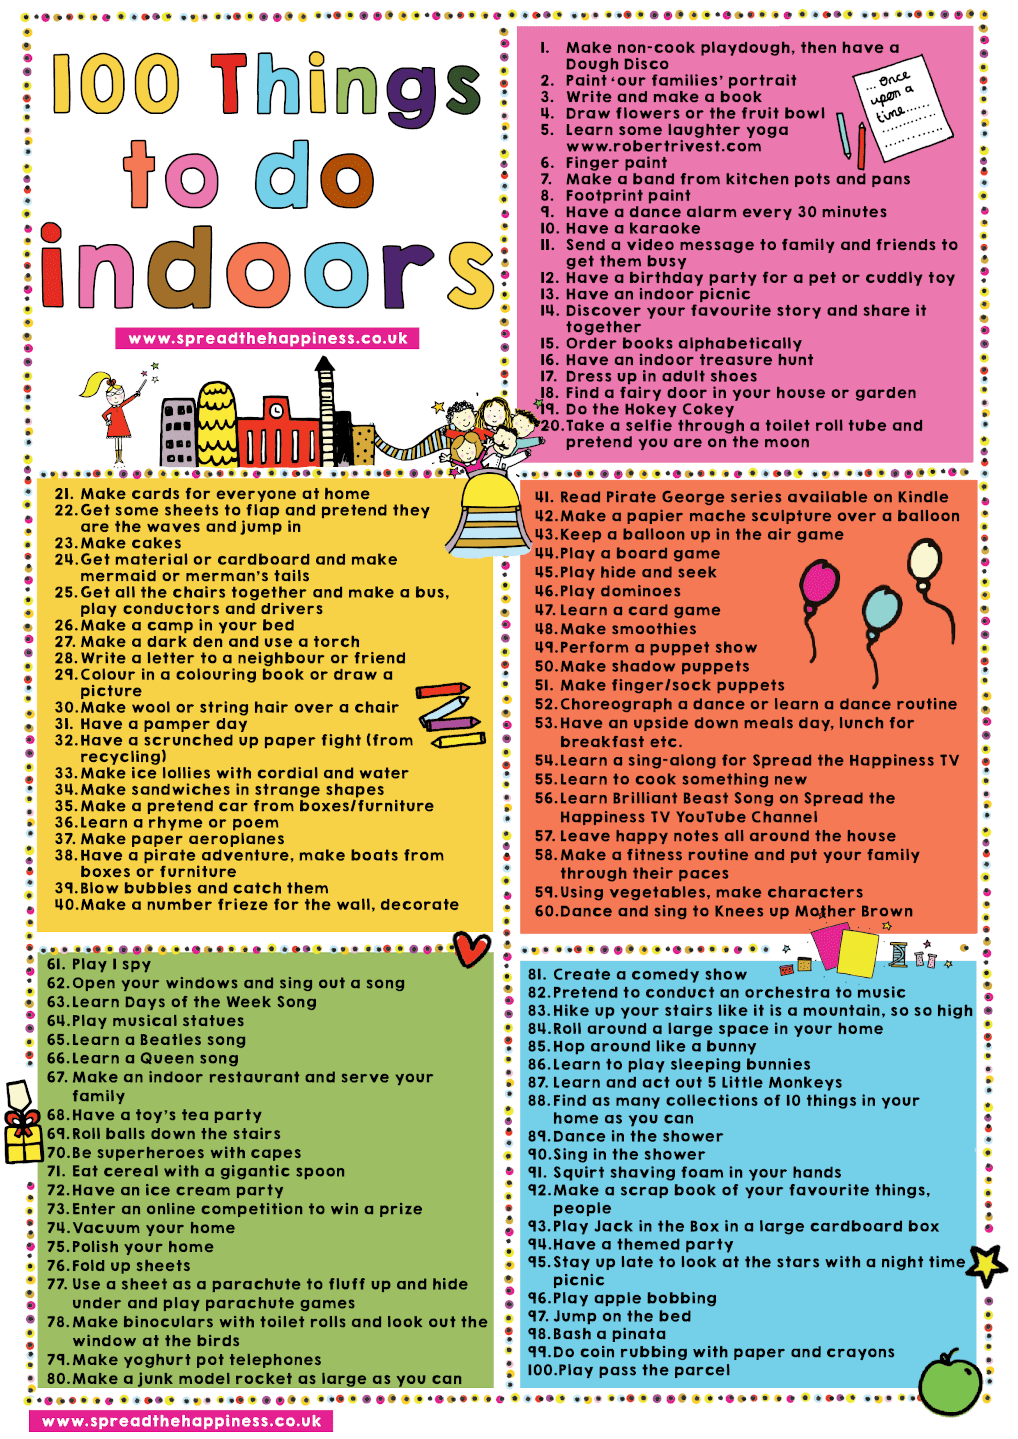 100 things to do at home